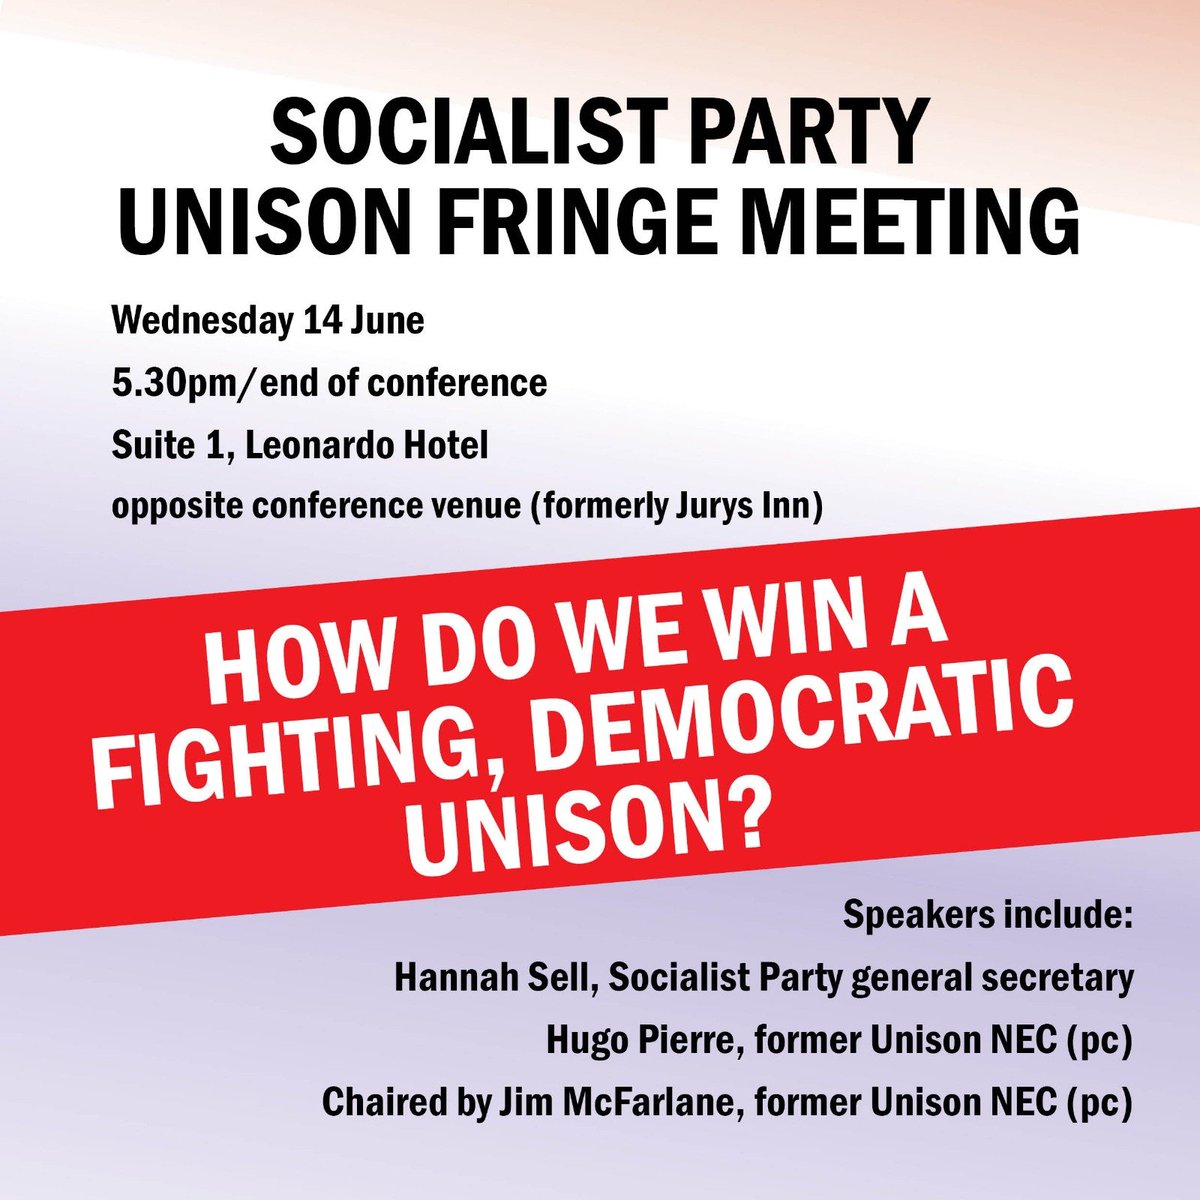 #undc23 Socialist Party Unison fringe meeting. Wednesday 14 June, 5:30pm/end of conference, Suite 1, Leonardo Hotel

HOW DO WE WIN A FIGHTING, DEMOCRATIC UNISON?

Speakers include: Hannah Sell, Socialist Party general secretary
Hugo Pierre & Jim Mcfarlane, former Unison NEC (pc)